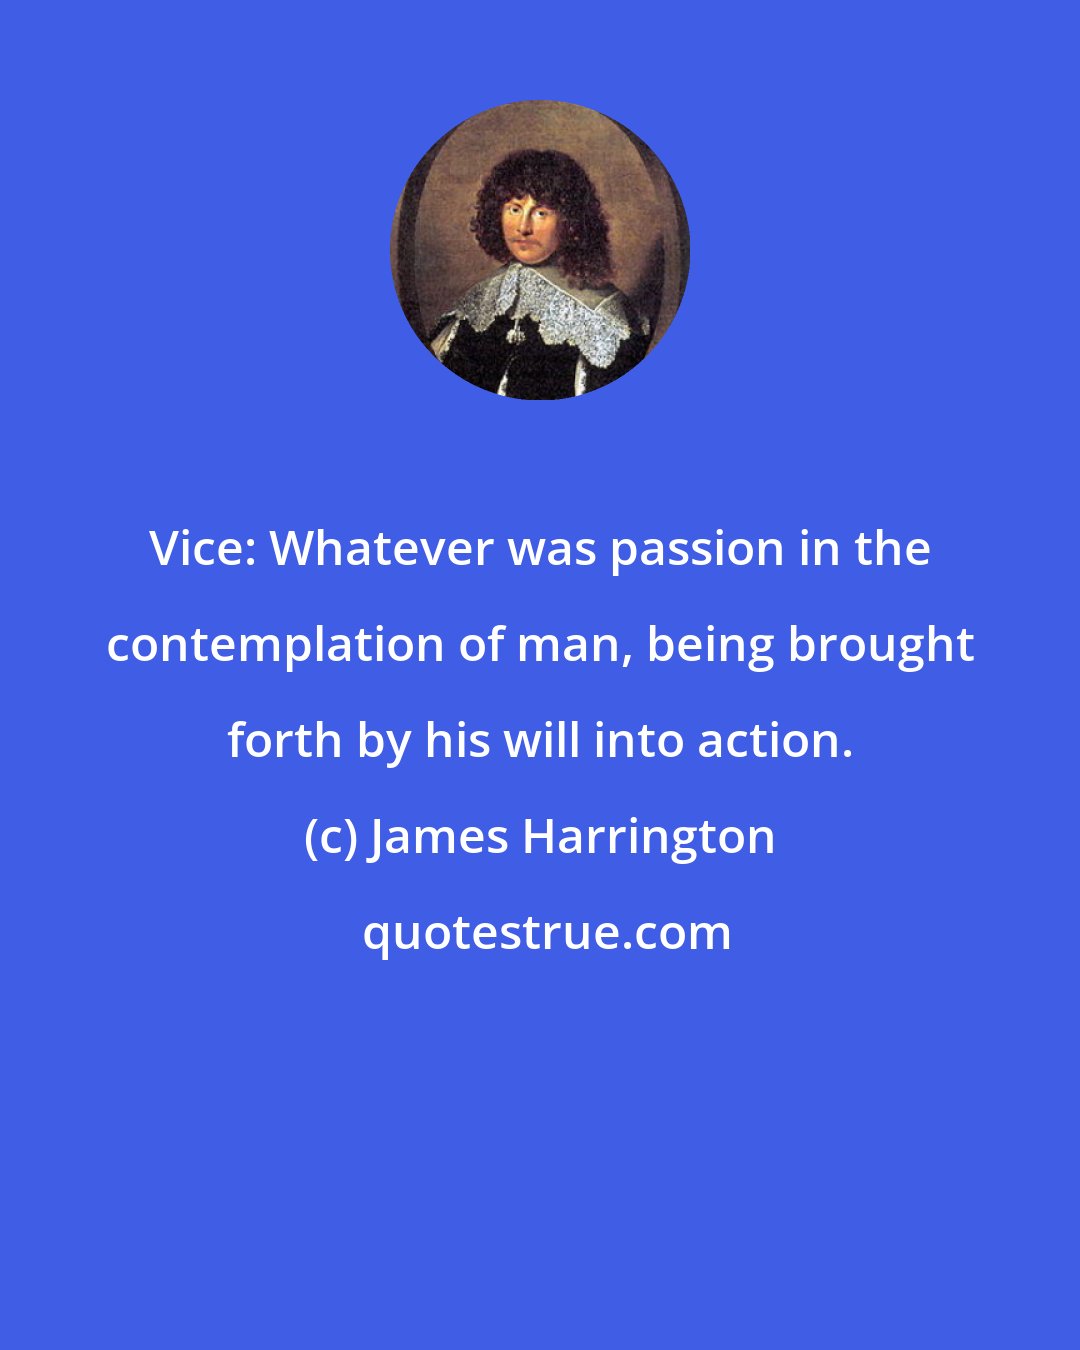 James Harrington: Vice: Whatever was passion in the contemplation of man, being brought forth by his will into action.